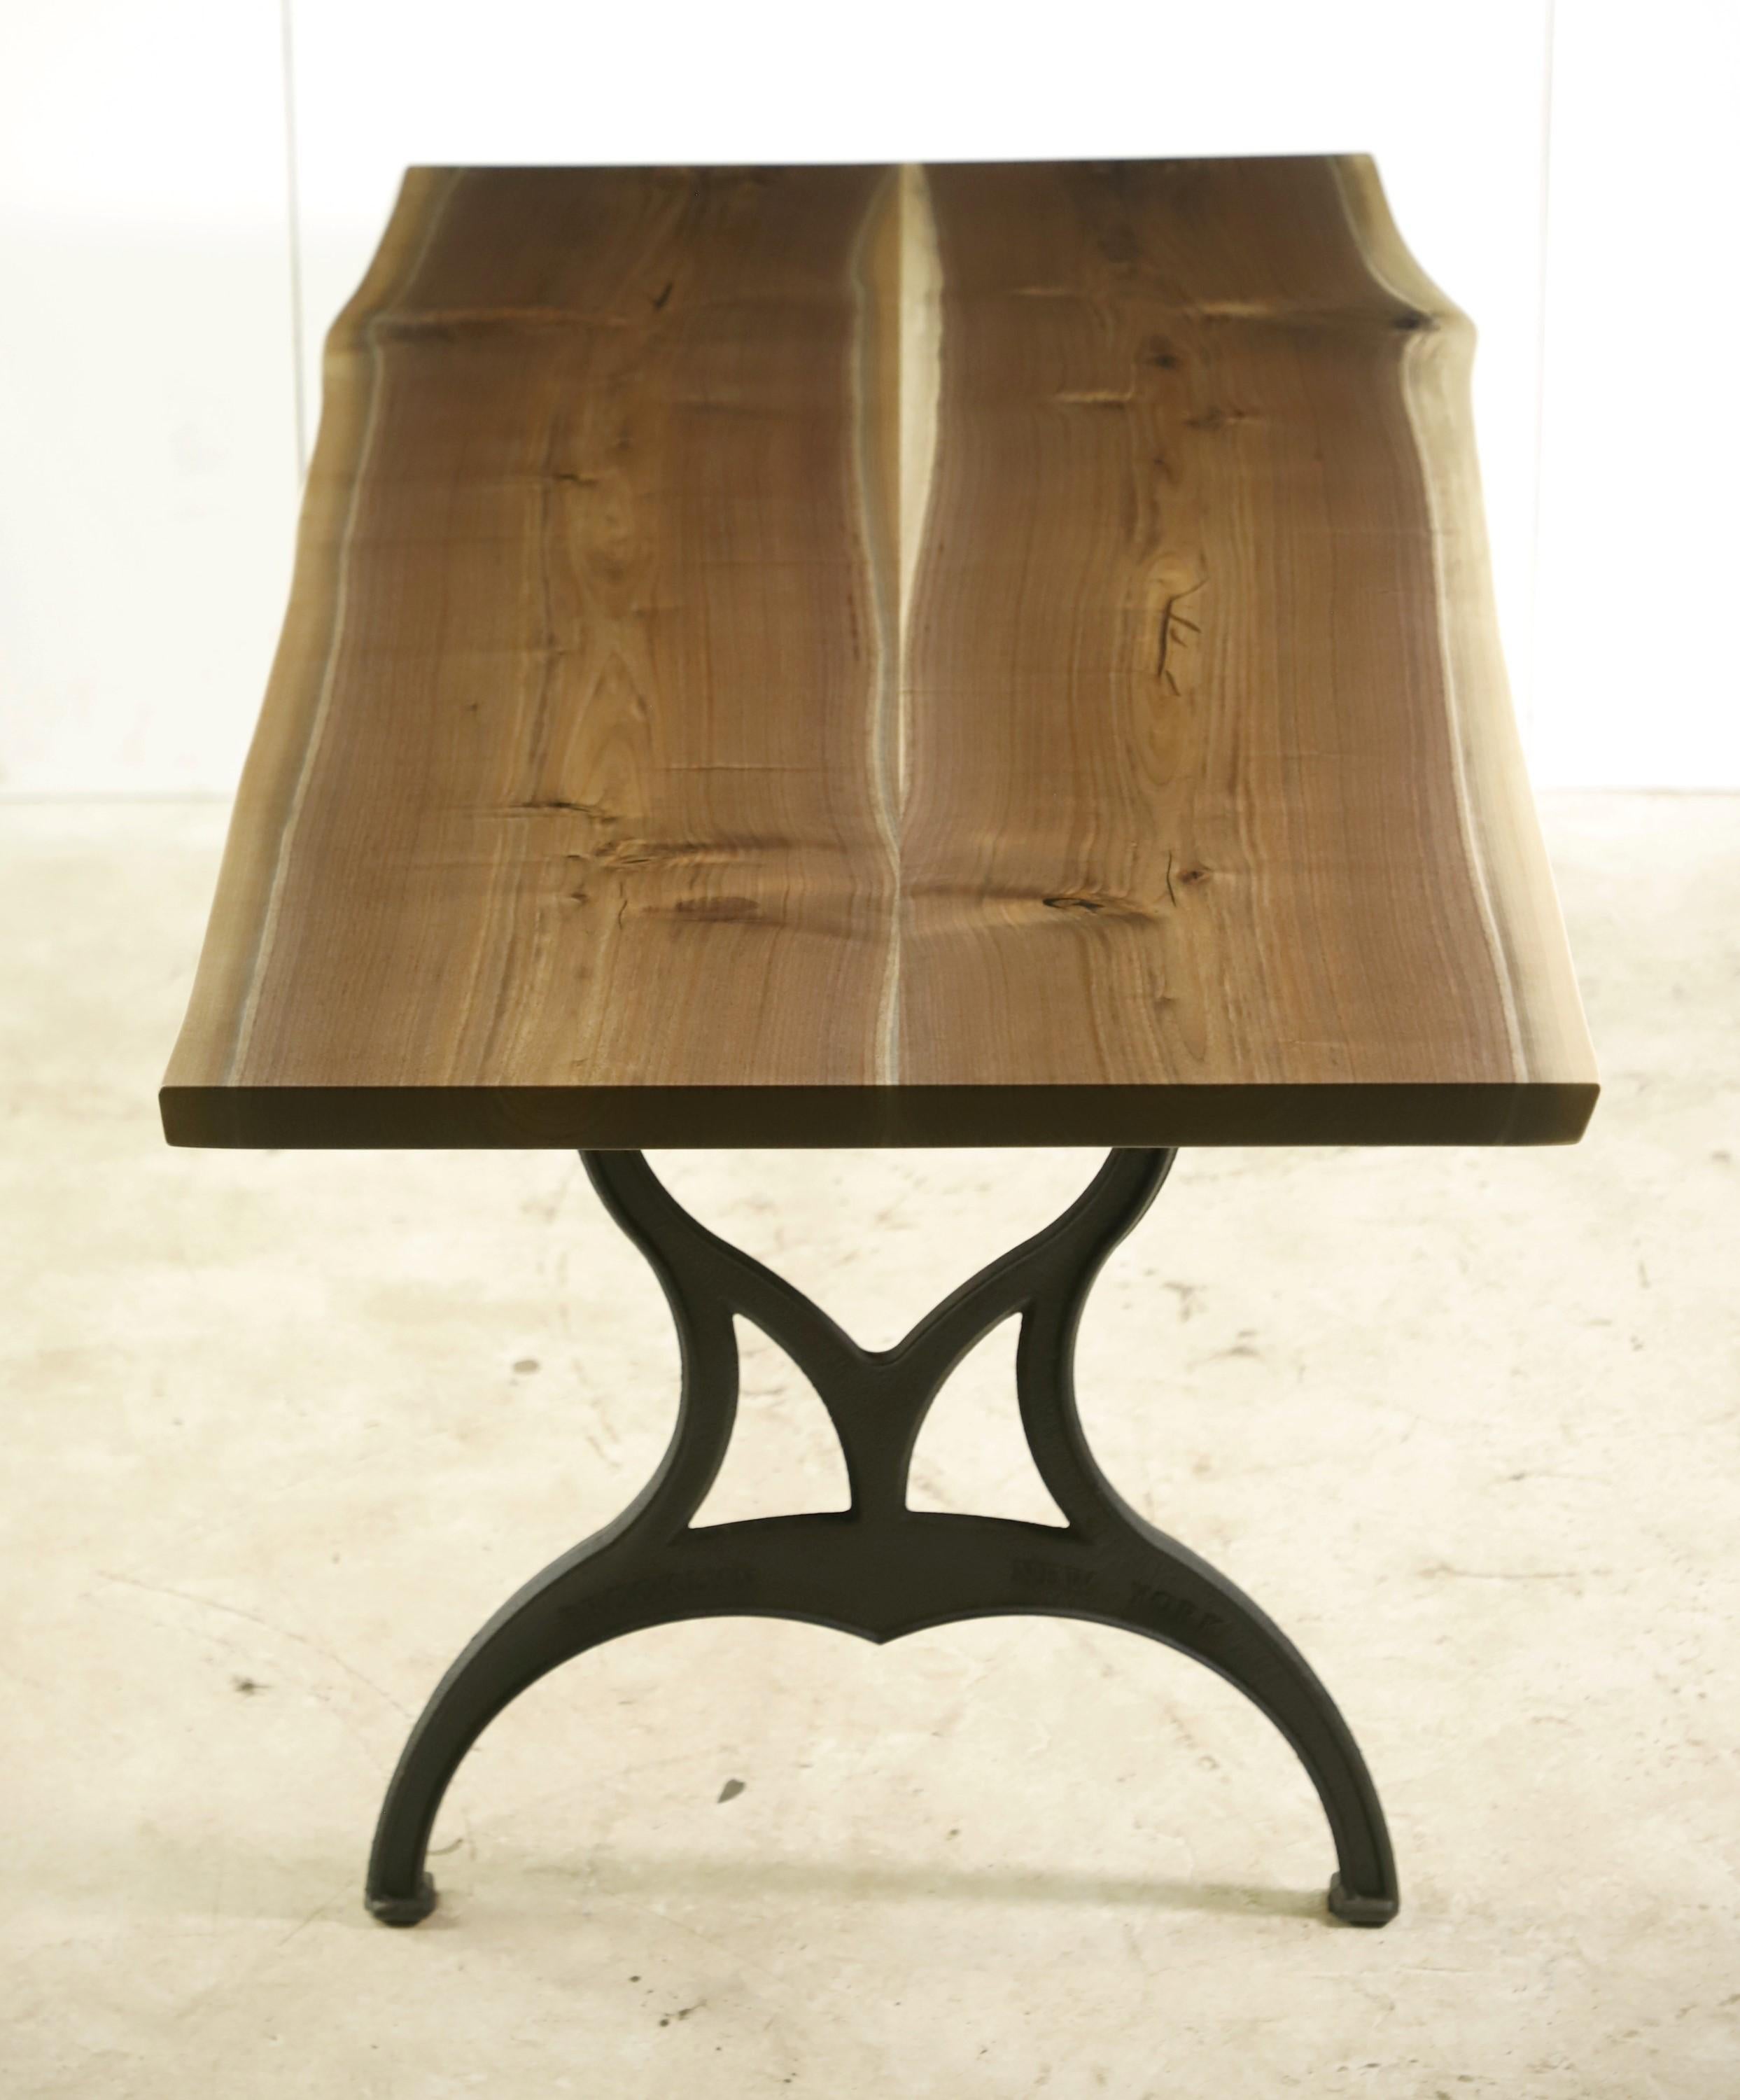 This live edge table features a two slab solid walnut top with a smooth satin finish paired with cast iron Brooklyn legs. This table is ready to ship. Please note, this item is located in our Scranton, PA location.